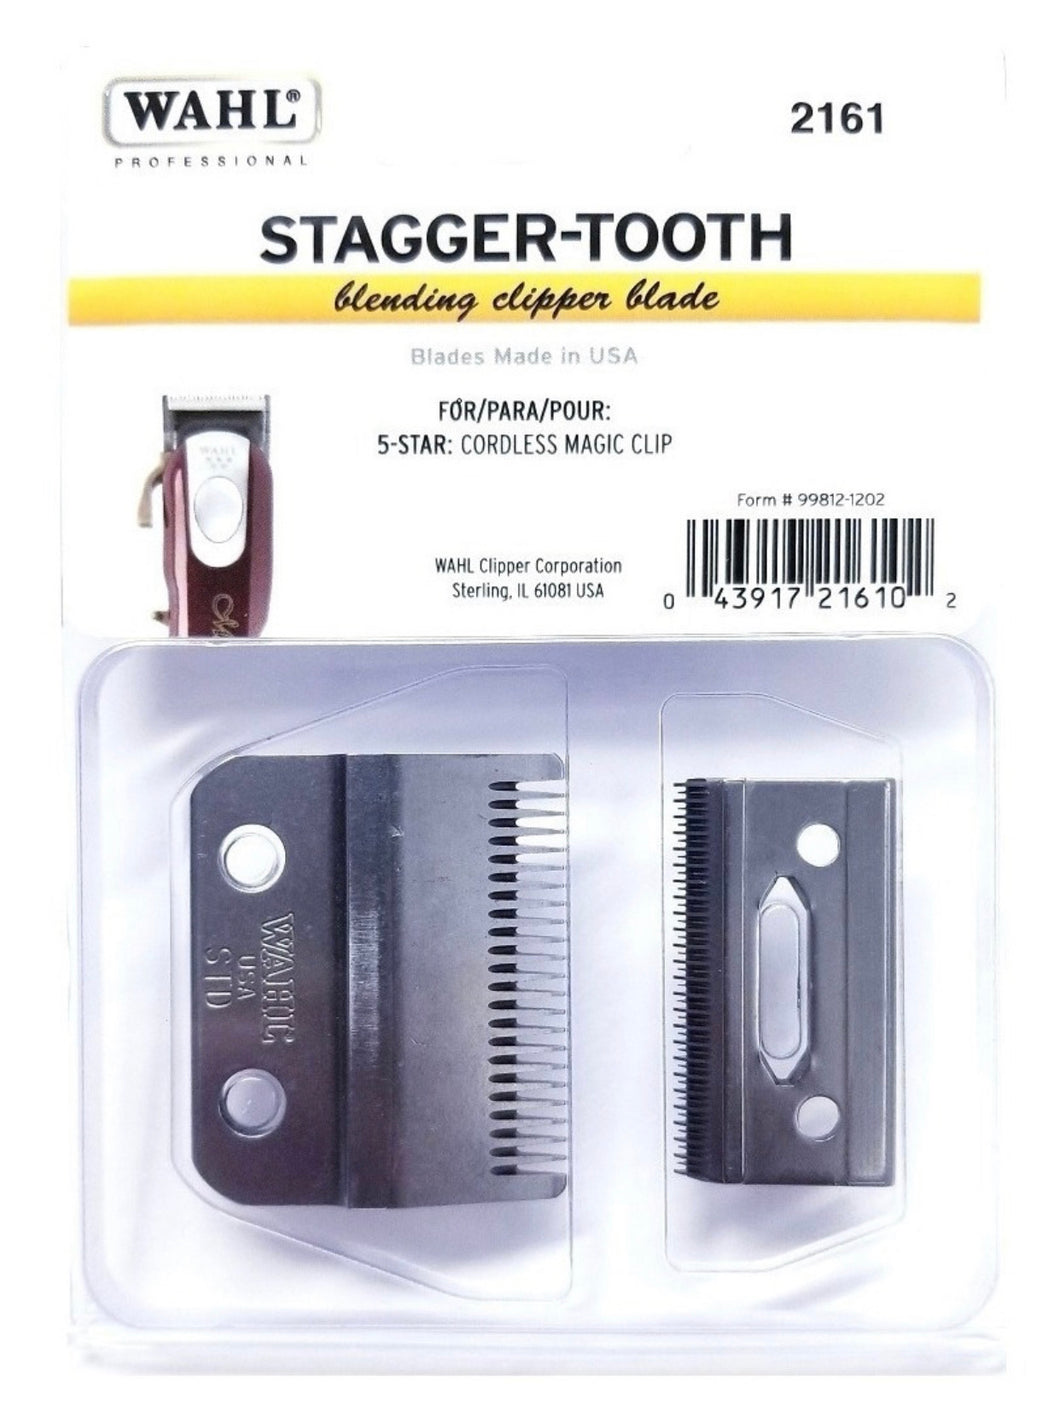 MAGIC CLIP CORDLESS STAGGER TOOTH CRUNCH 2 HOLE BLADE